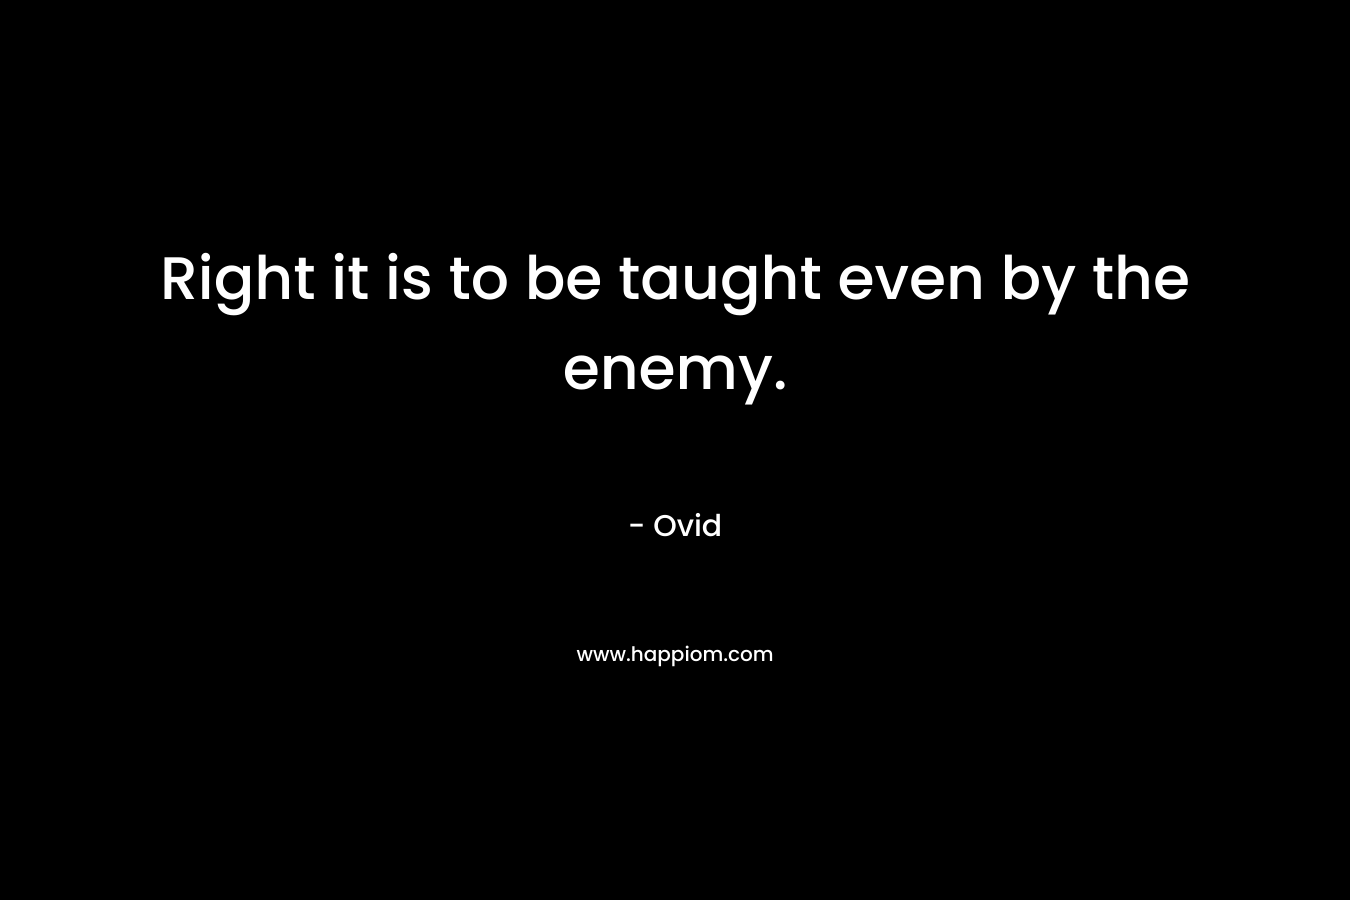 Right it is to be taught even by the enemy.